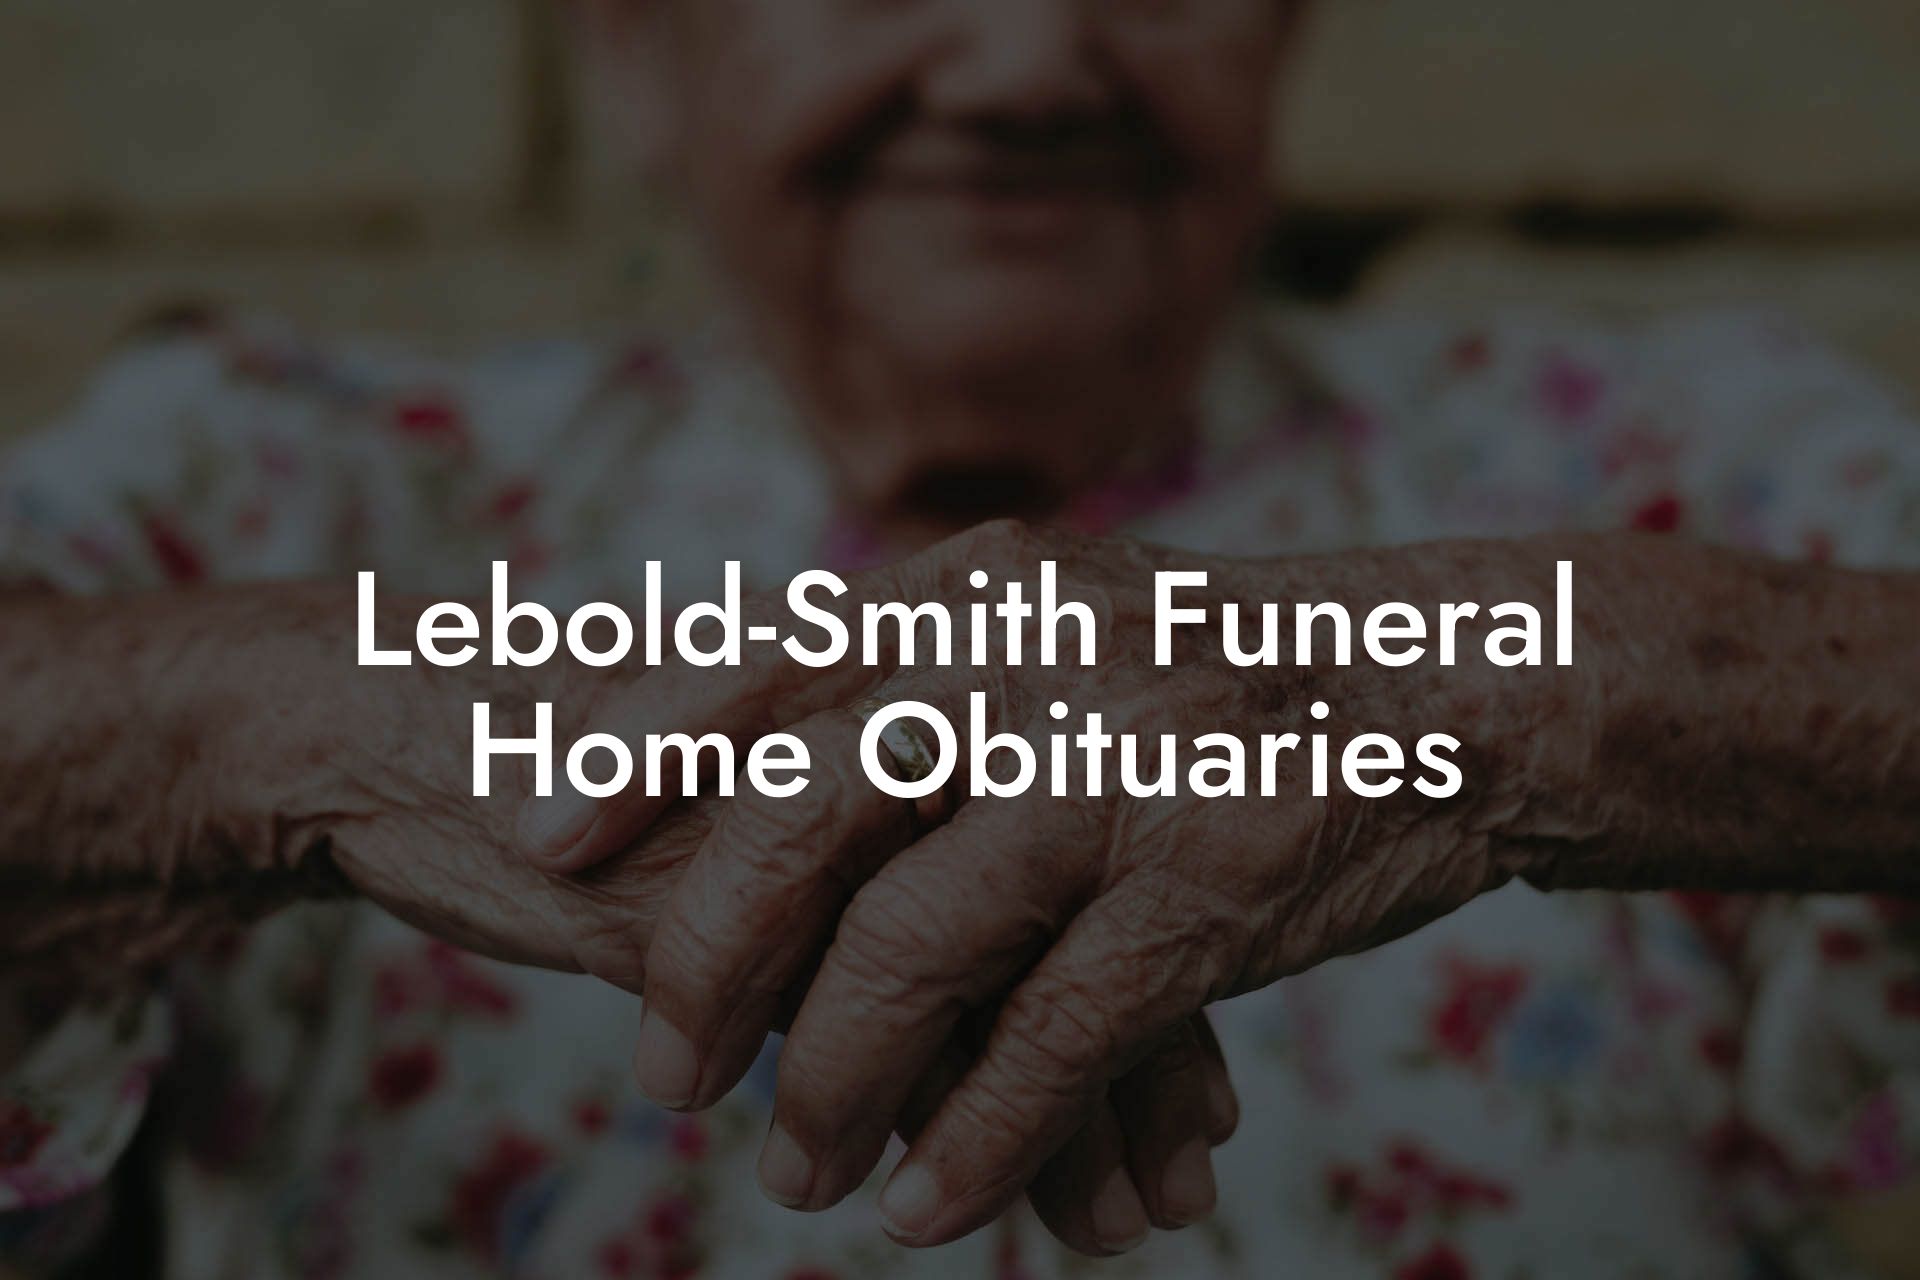 Lebold-Smith Funeral Home Obituaries